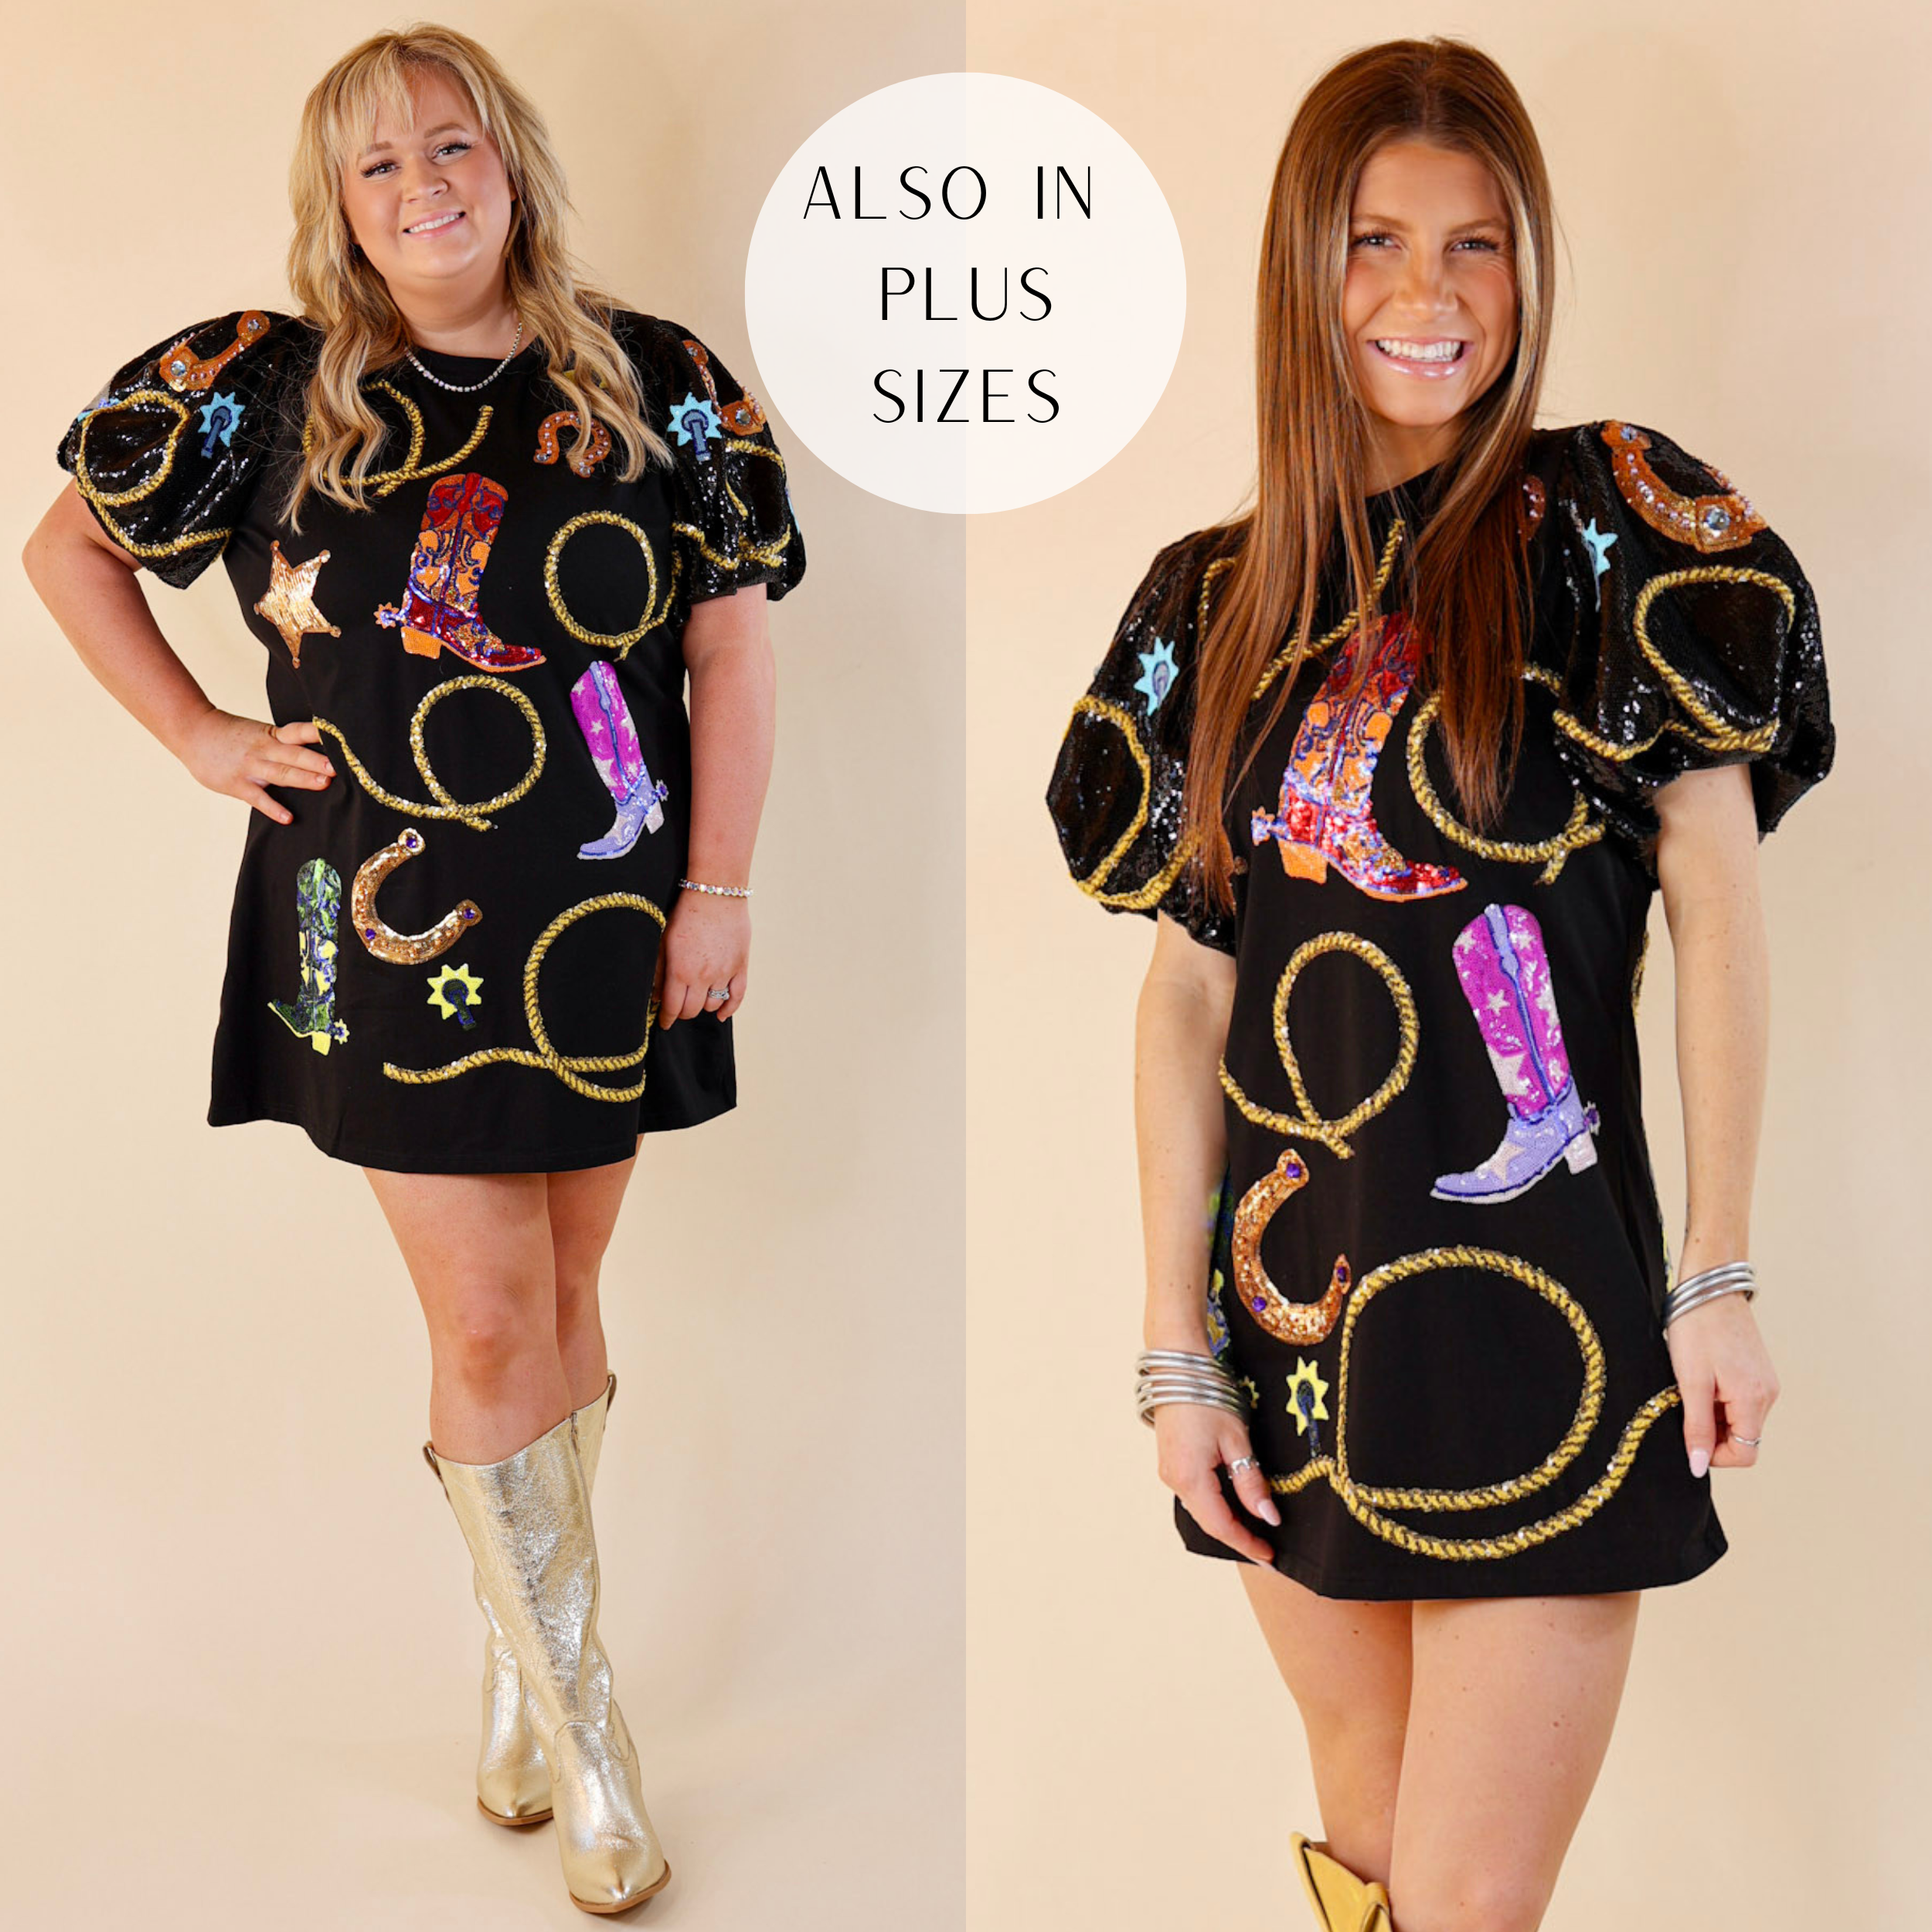 Models are wearing a black dress with sequin puff sleeves and sequin boots and rope detailing in black. Plus size model has it paired with gold boots and silver jewelry. Size small model has it paired with yellow boots and silver jewelry.